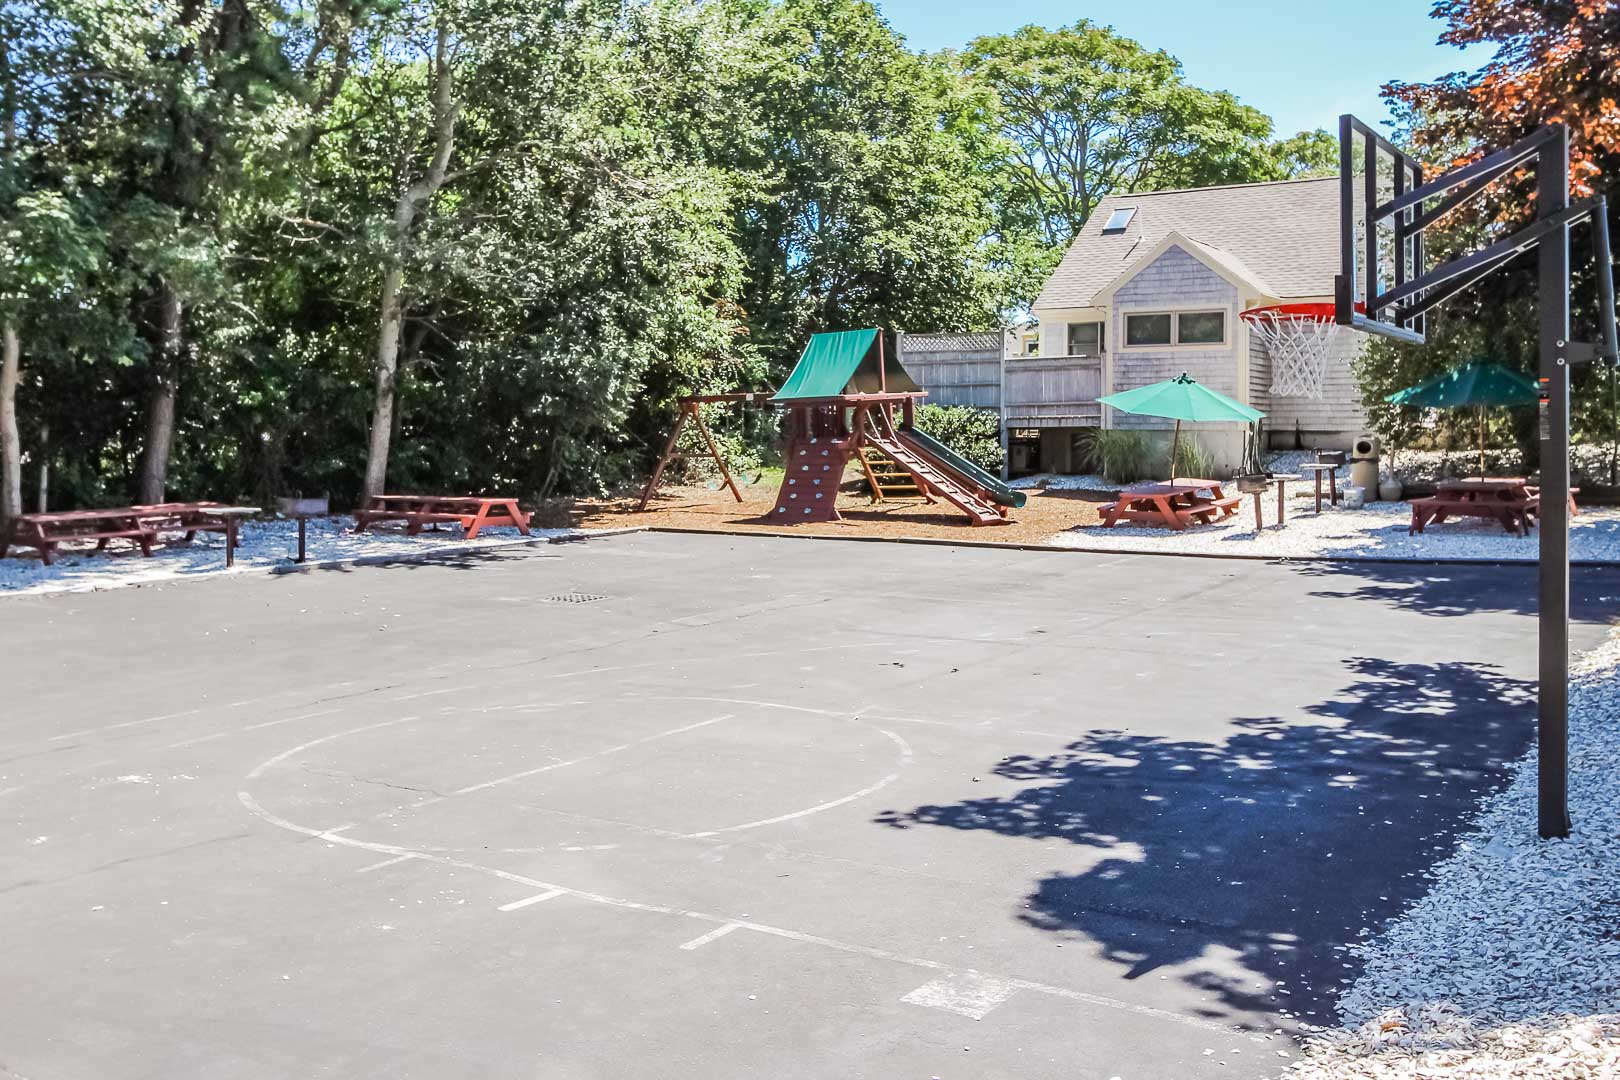 A spacious basketball court and playground at the Holly Tree Resort in Massachusetts.